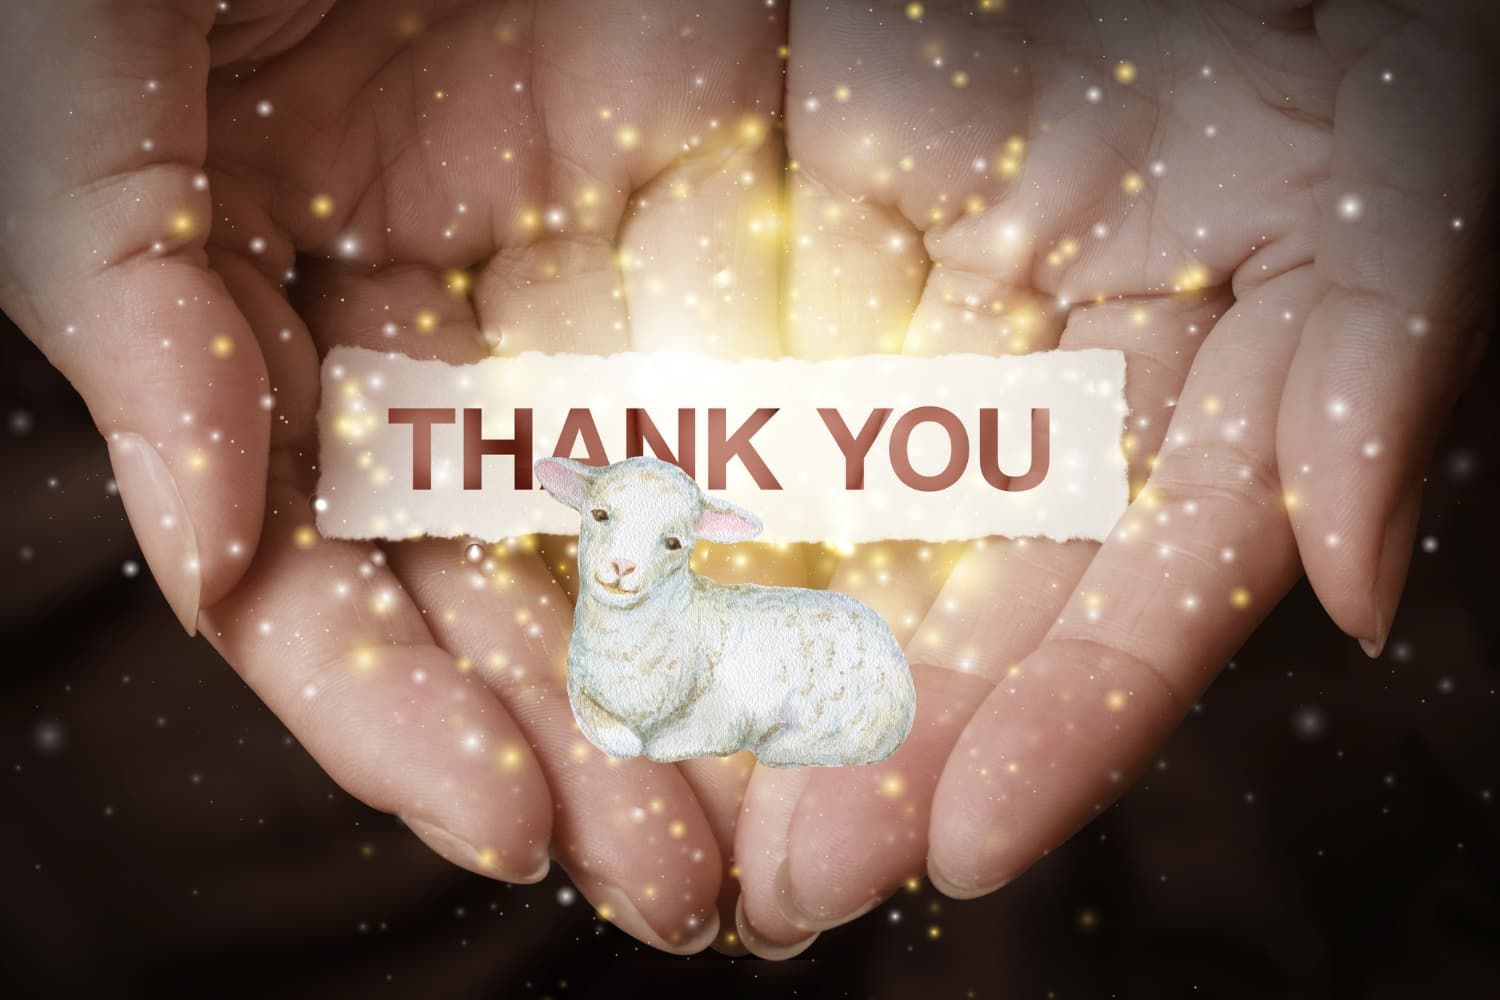 Thankful%20for%20the%20lamb-3f20e711 Mourning / grief